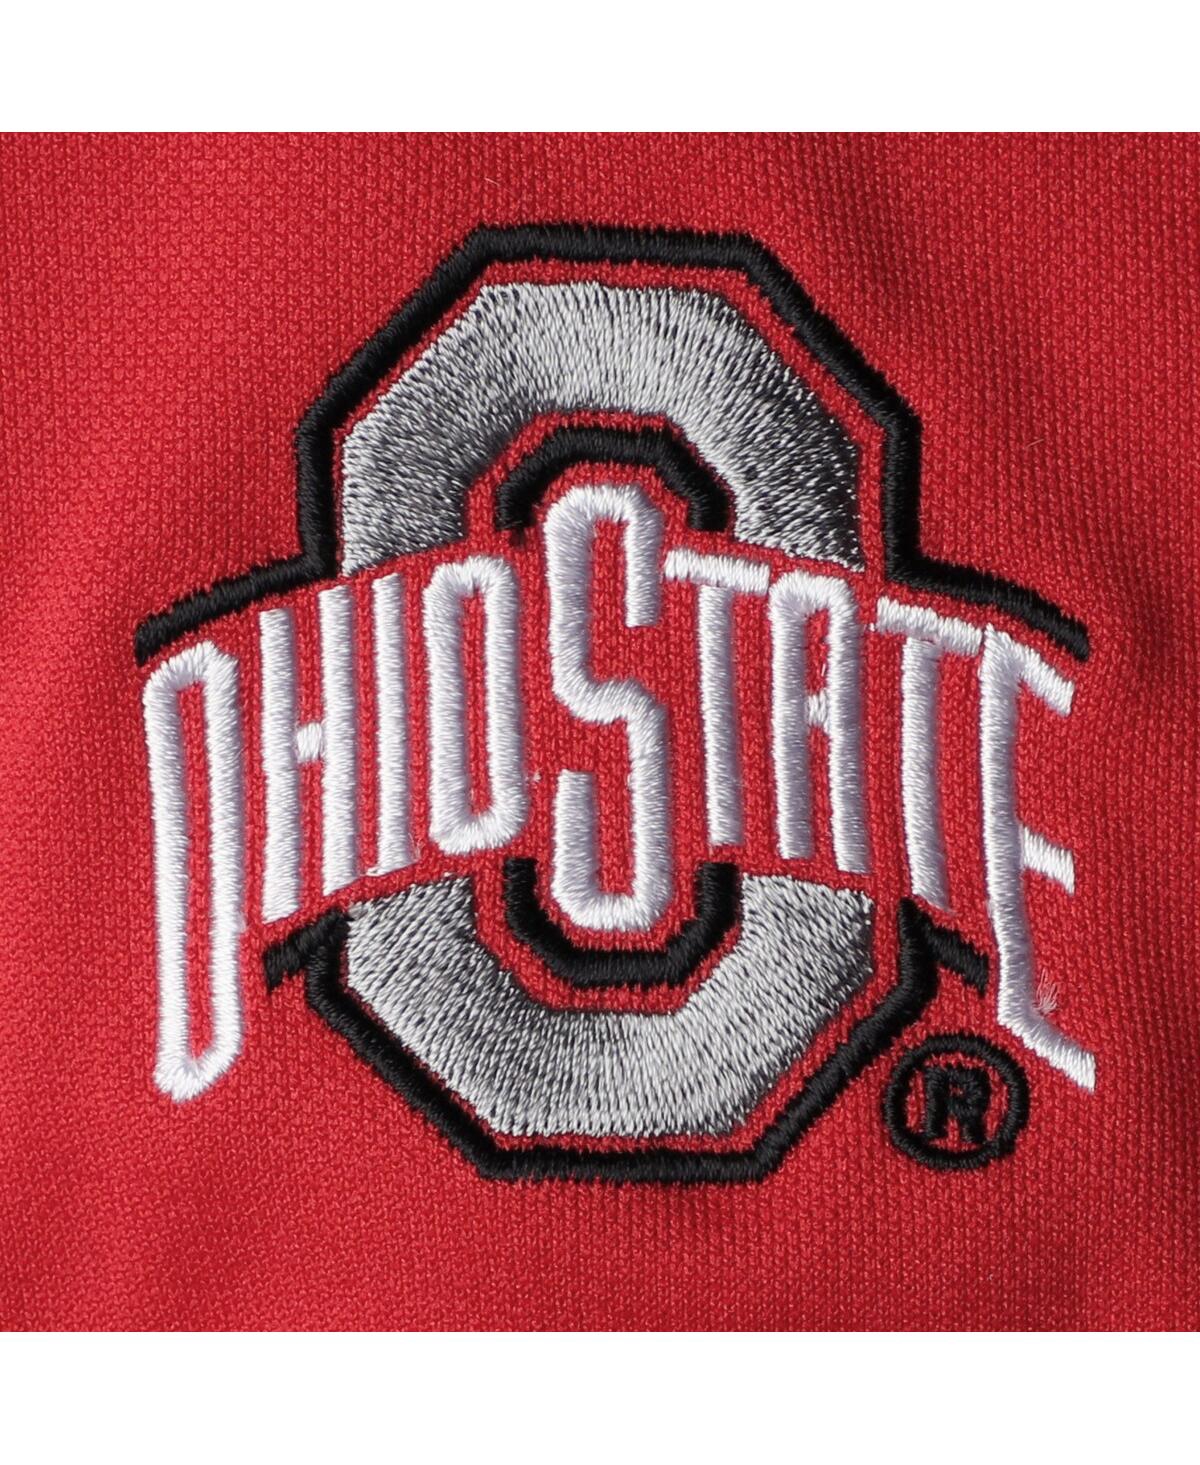 Shop Little King Apparel Toddler Girls Scarlet Ohio State Buckeyes Two-piece Cheer Set